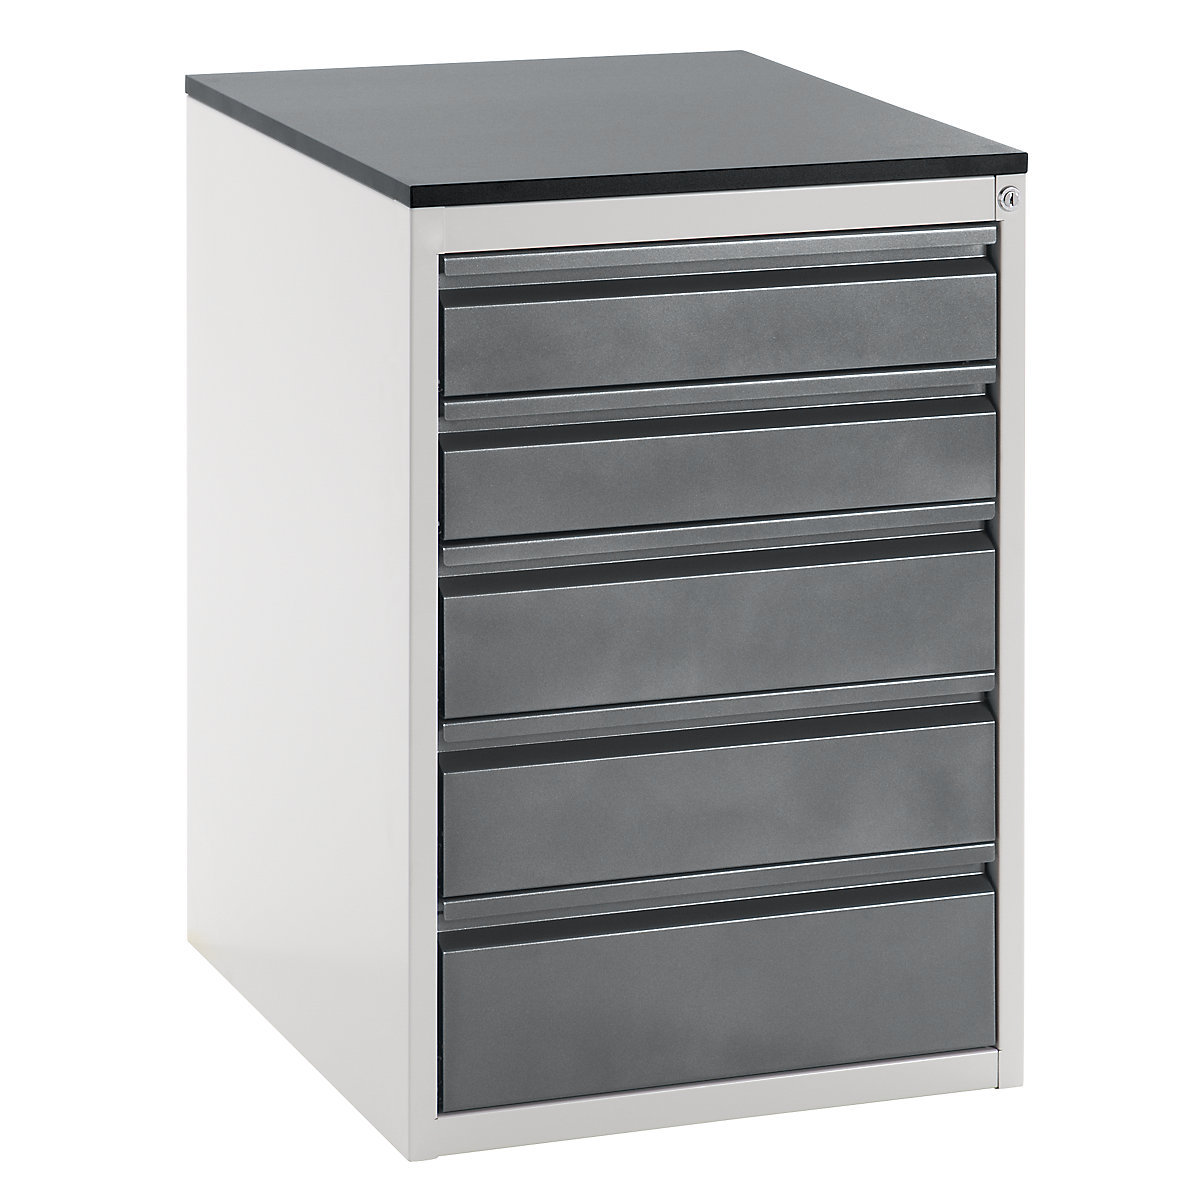 Drawer cupboard with telescopic guides – RAU, height 820 mm, drawers: 2 x 120, 2 x 150, 1 x 180 mm, light grey / metallic charcoal, width 580 mm-13